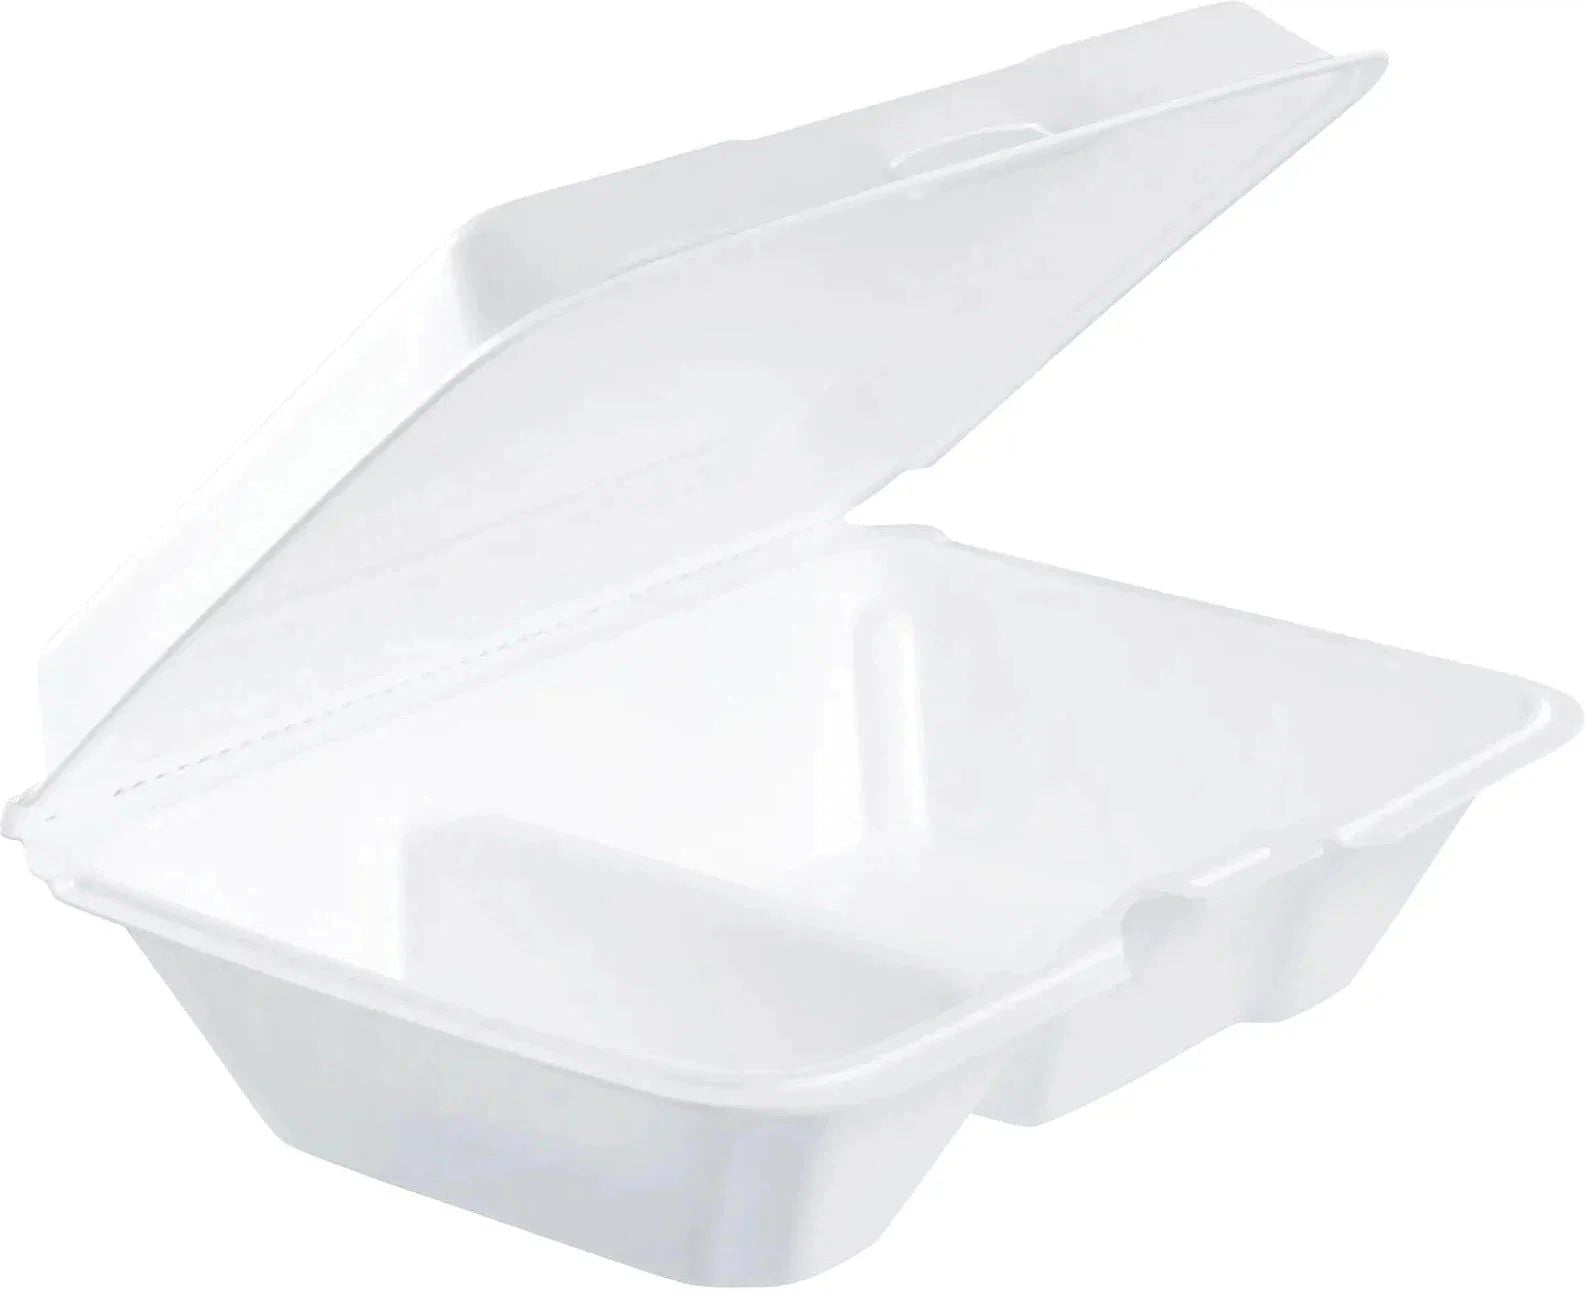 Dart Container - 9.3" x 6.4" x 2.9" White Insulated Foam Hinged Container 2 Compartment , 200/Cs - 205HT2